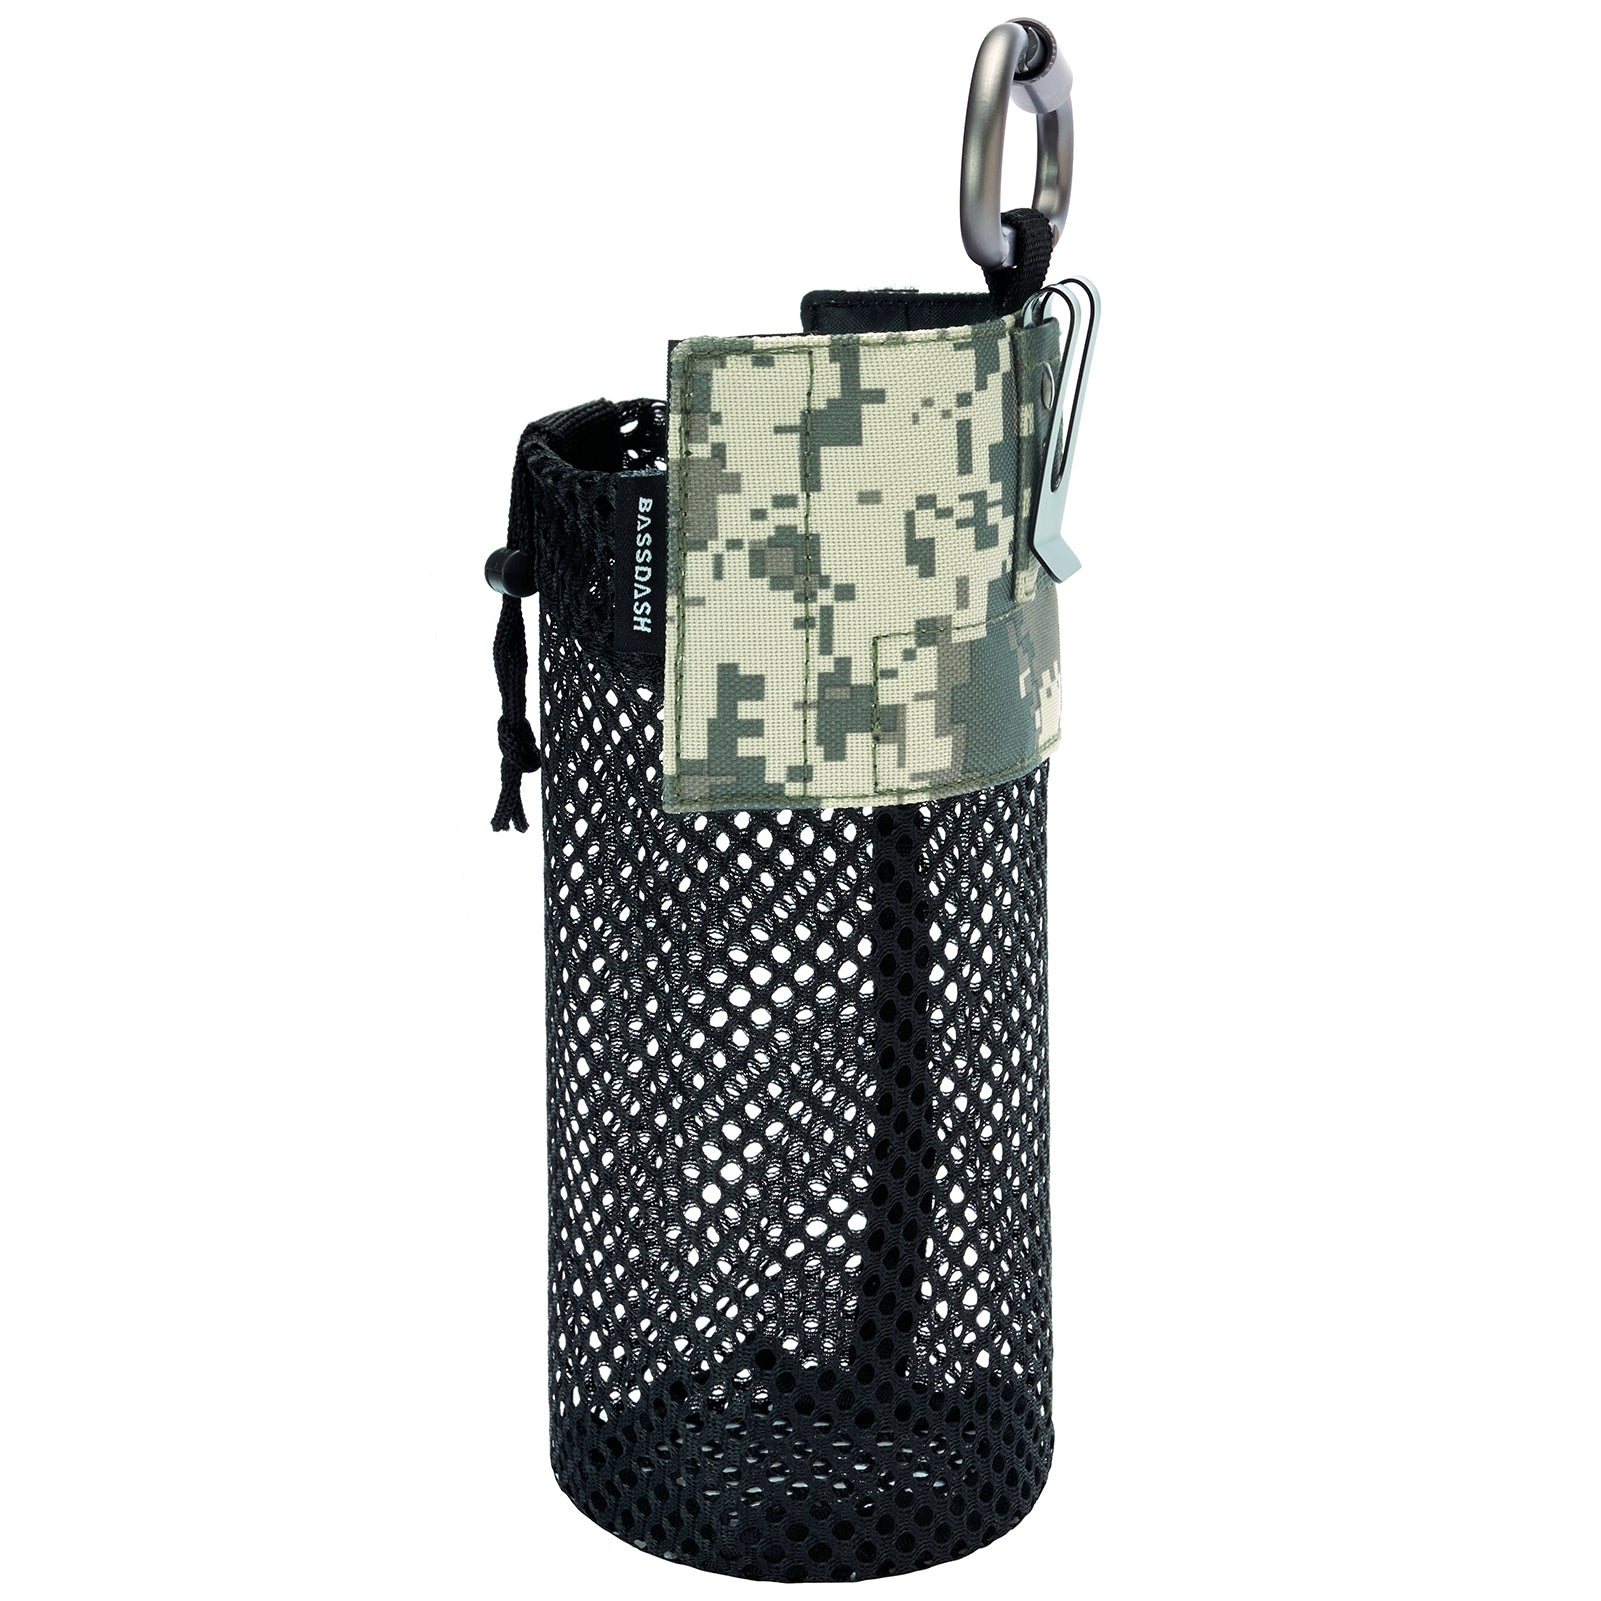 Bassdash Tactical Molle Water Bottle Pouch with Carabiner Foldable Mesh Holder  Bag for Travel Fishing Hunting Hiking Outdoor Activities